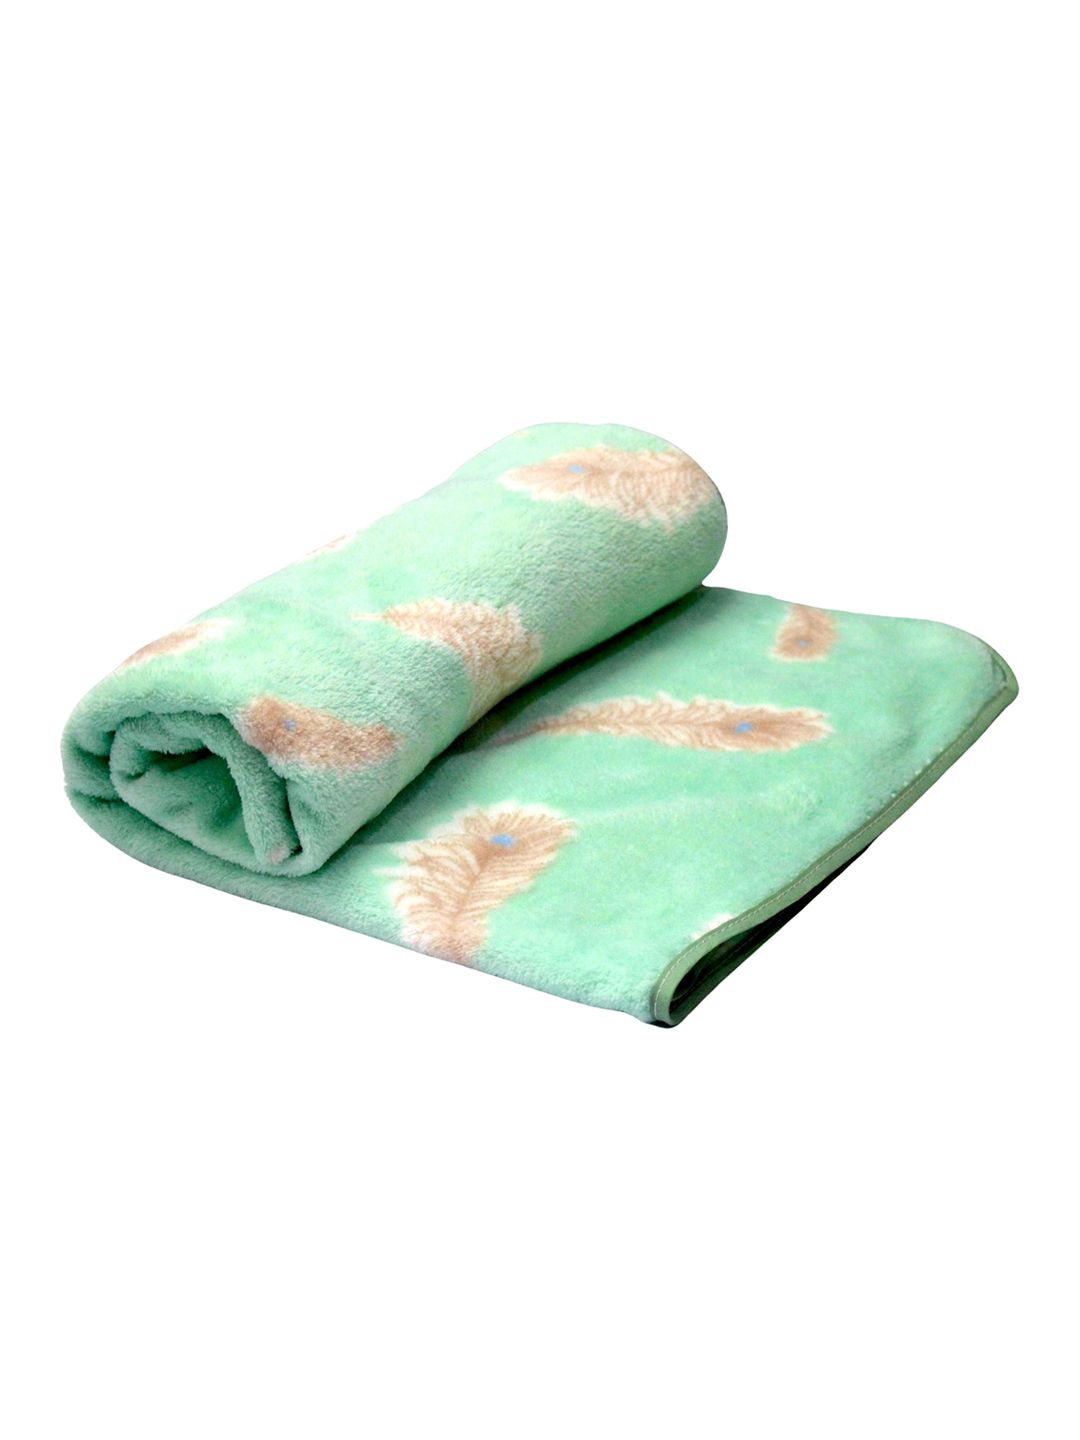 Tranquil square Green Printed Pure Cotton 650 GSM Bath Towel Price in India